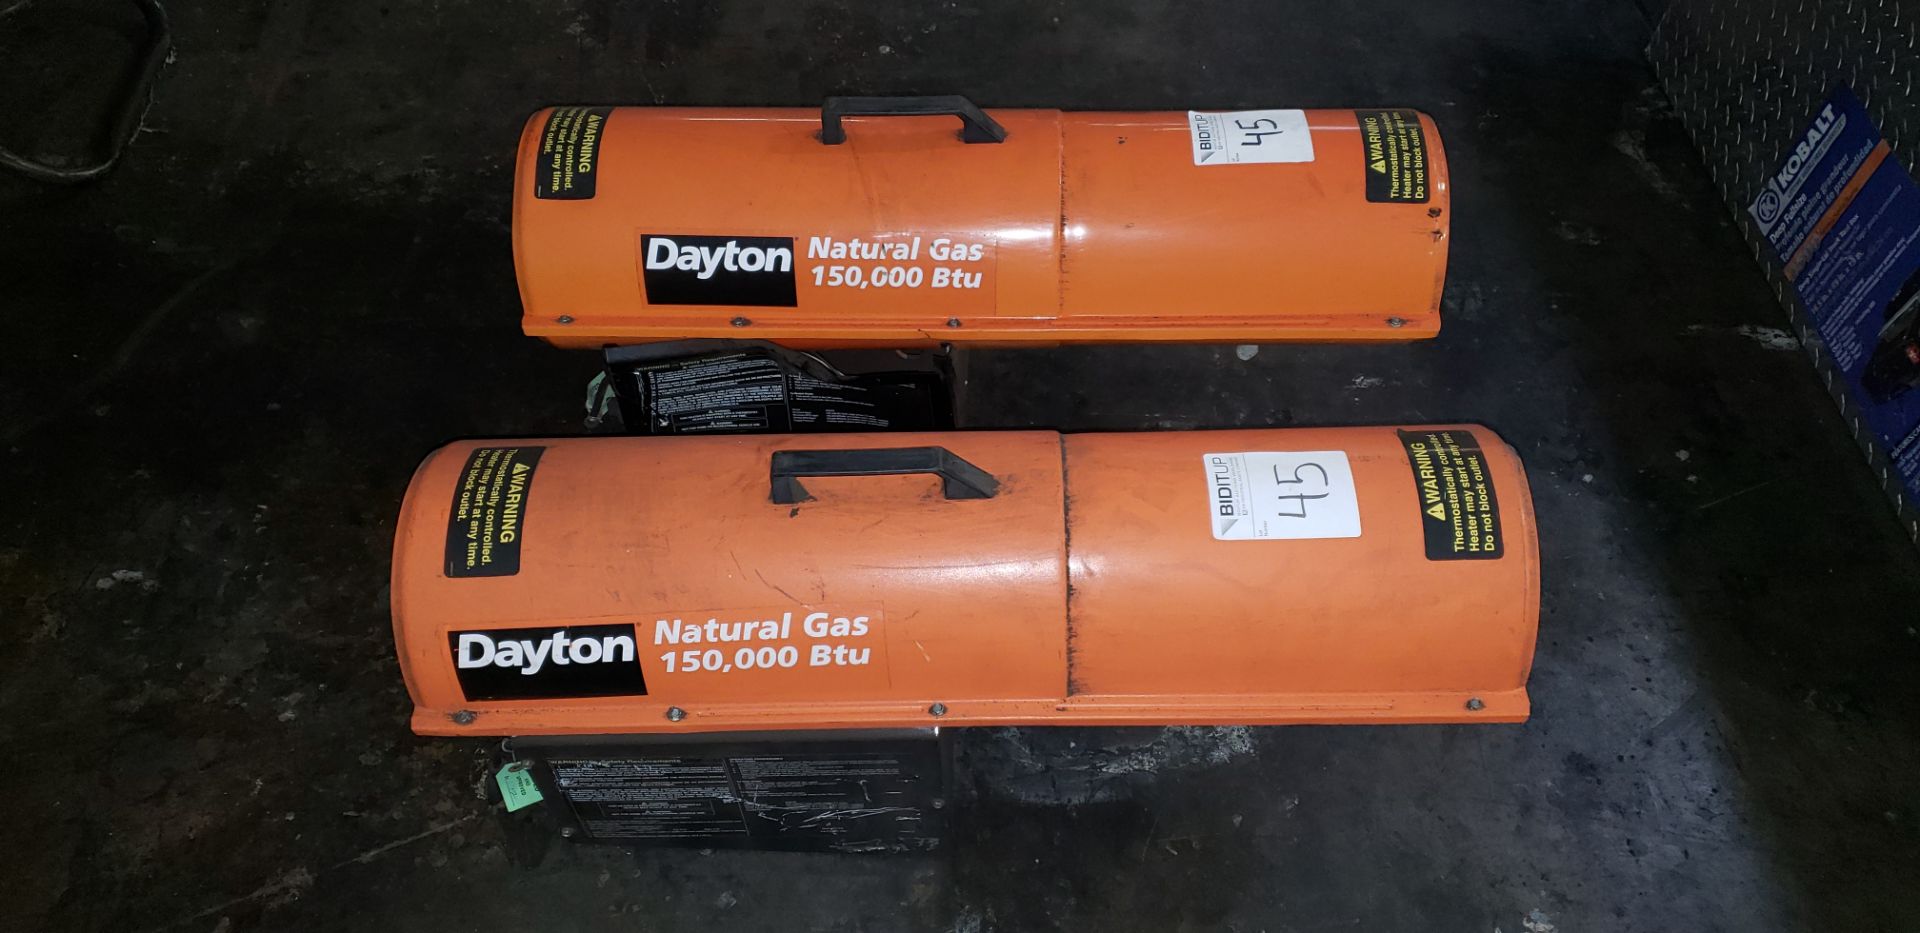 Dayton 150,000 BTU Natural Gas Heaters V- 110, S/N: 9455704 & 010531343, Located In: Riverside - Image 2 of 4